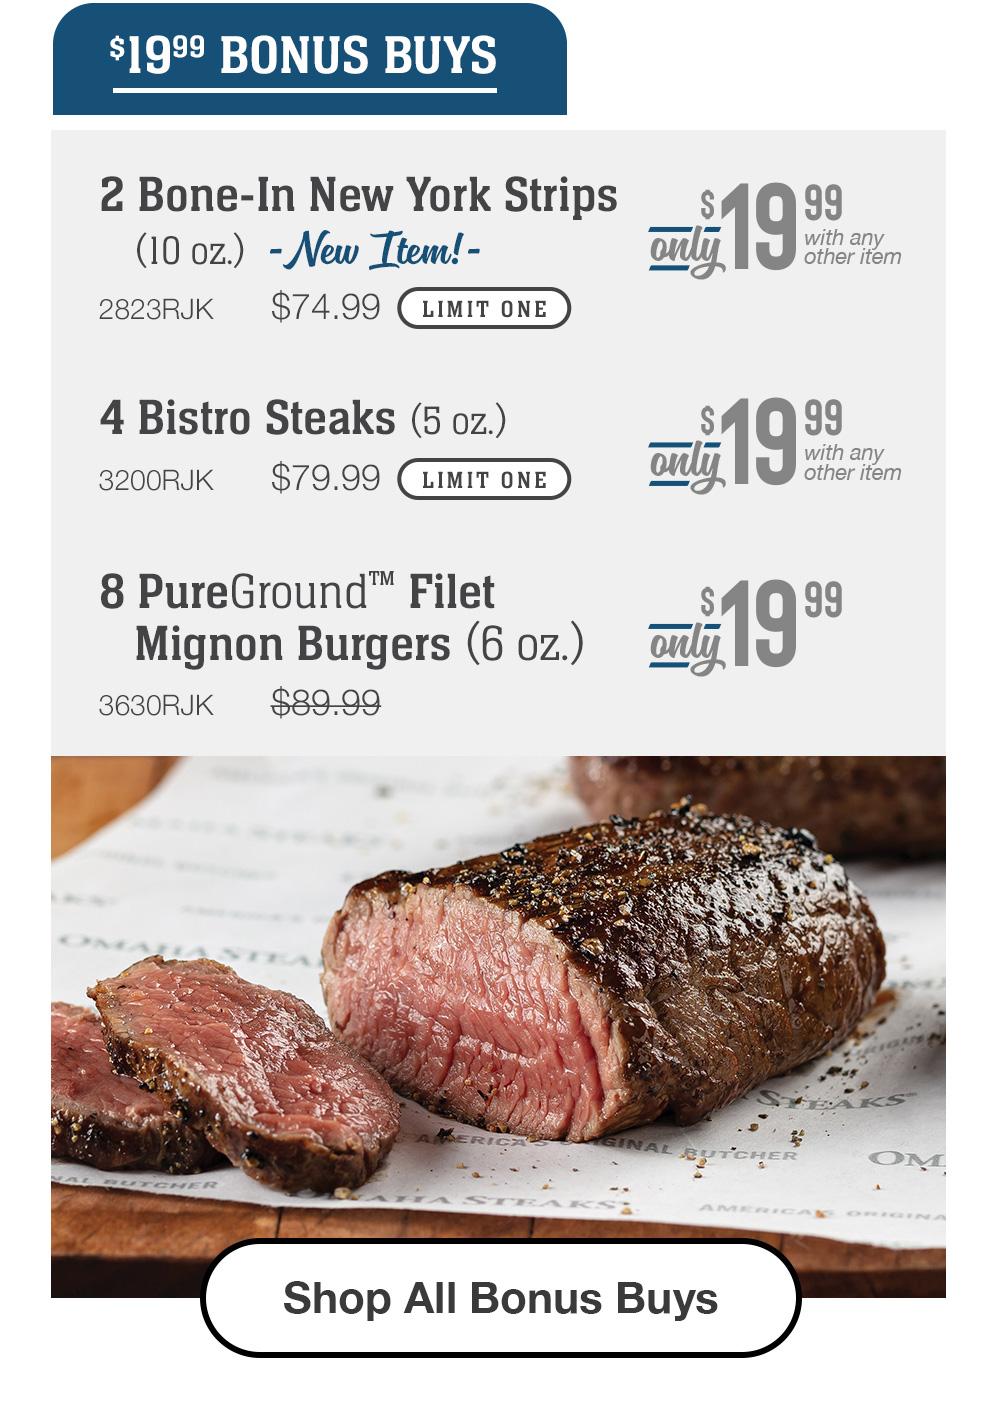 2 Bone-In New York Strips (10 oz.) - New Item! - 2823RJK $74.99 LIMIT ONE with any other item Only $19.99 | 4 Bistro Steaks (5 oz.) - 3200RJK $79.99 LIMIT ONE Only $19.99 with any other item | 8 PureGround™ Filet Mignon Burgers (6 oz.) - 3630RJK $89.99 Only $19.99 || Shop All Bonus Buys